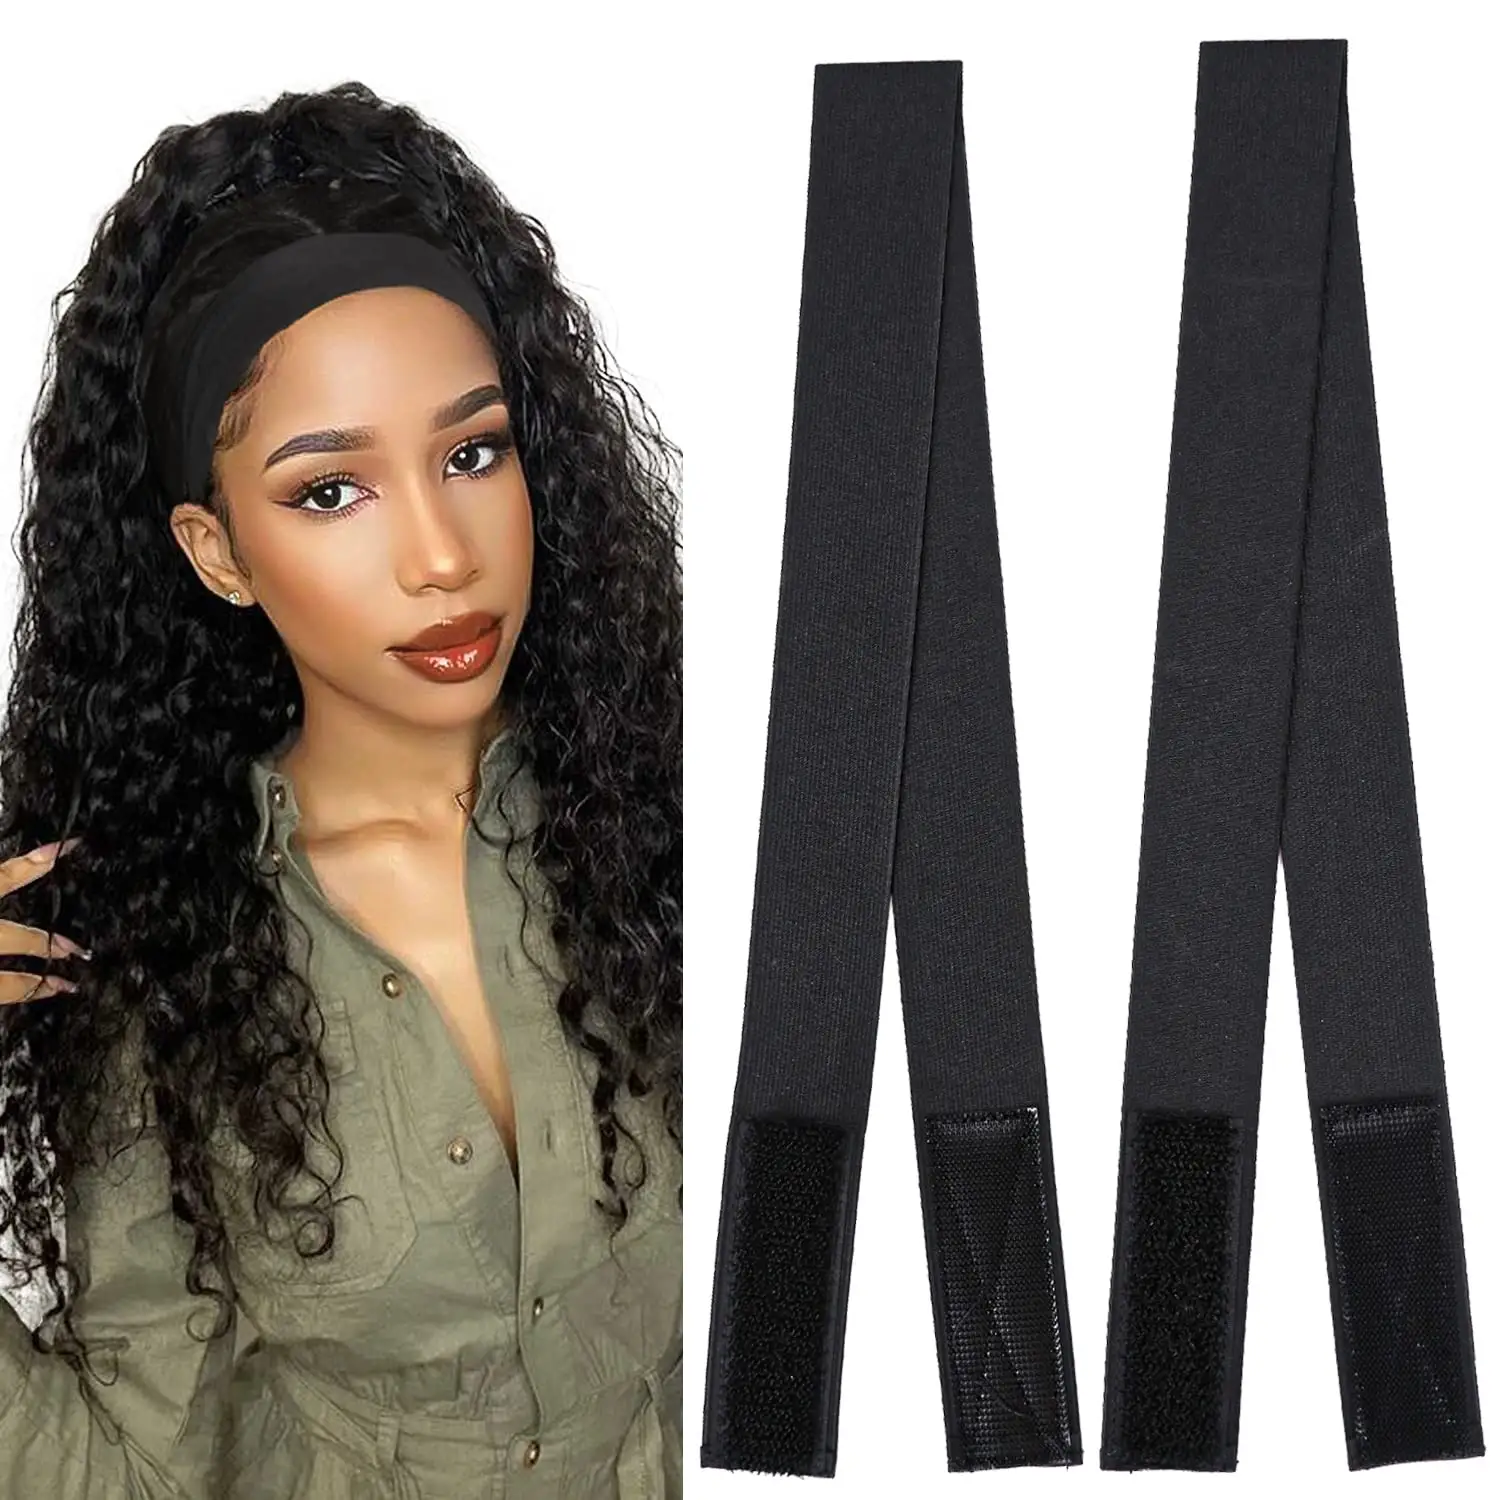 Repeat Melting Edge Band Slayer Lace Melt Bands Elastic Band for Wigs Adjustable Head Wraps